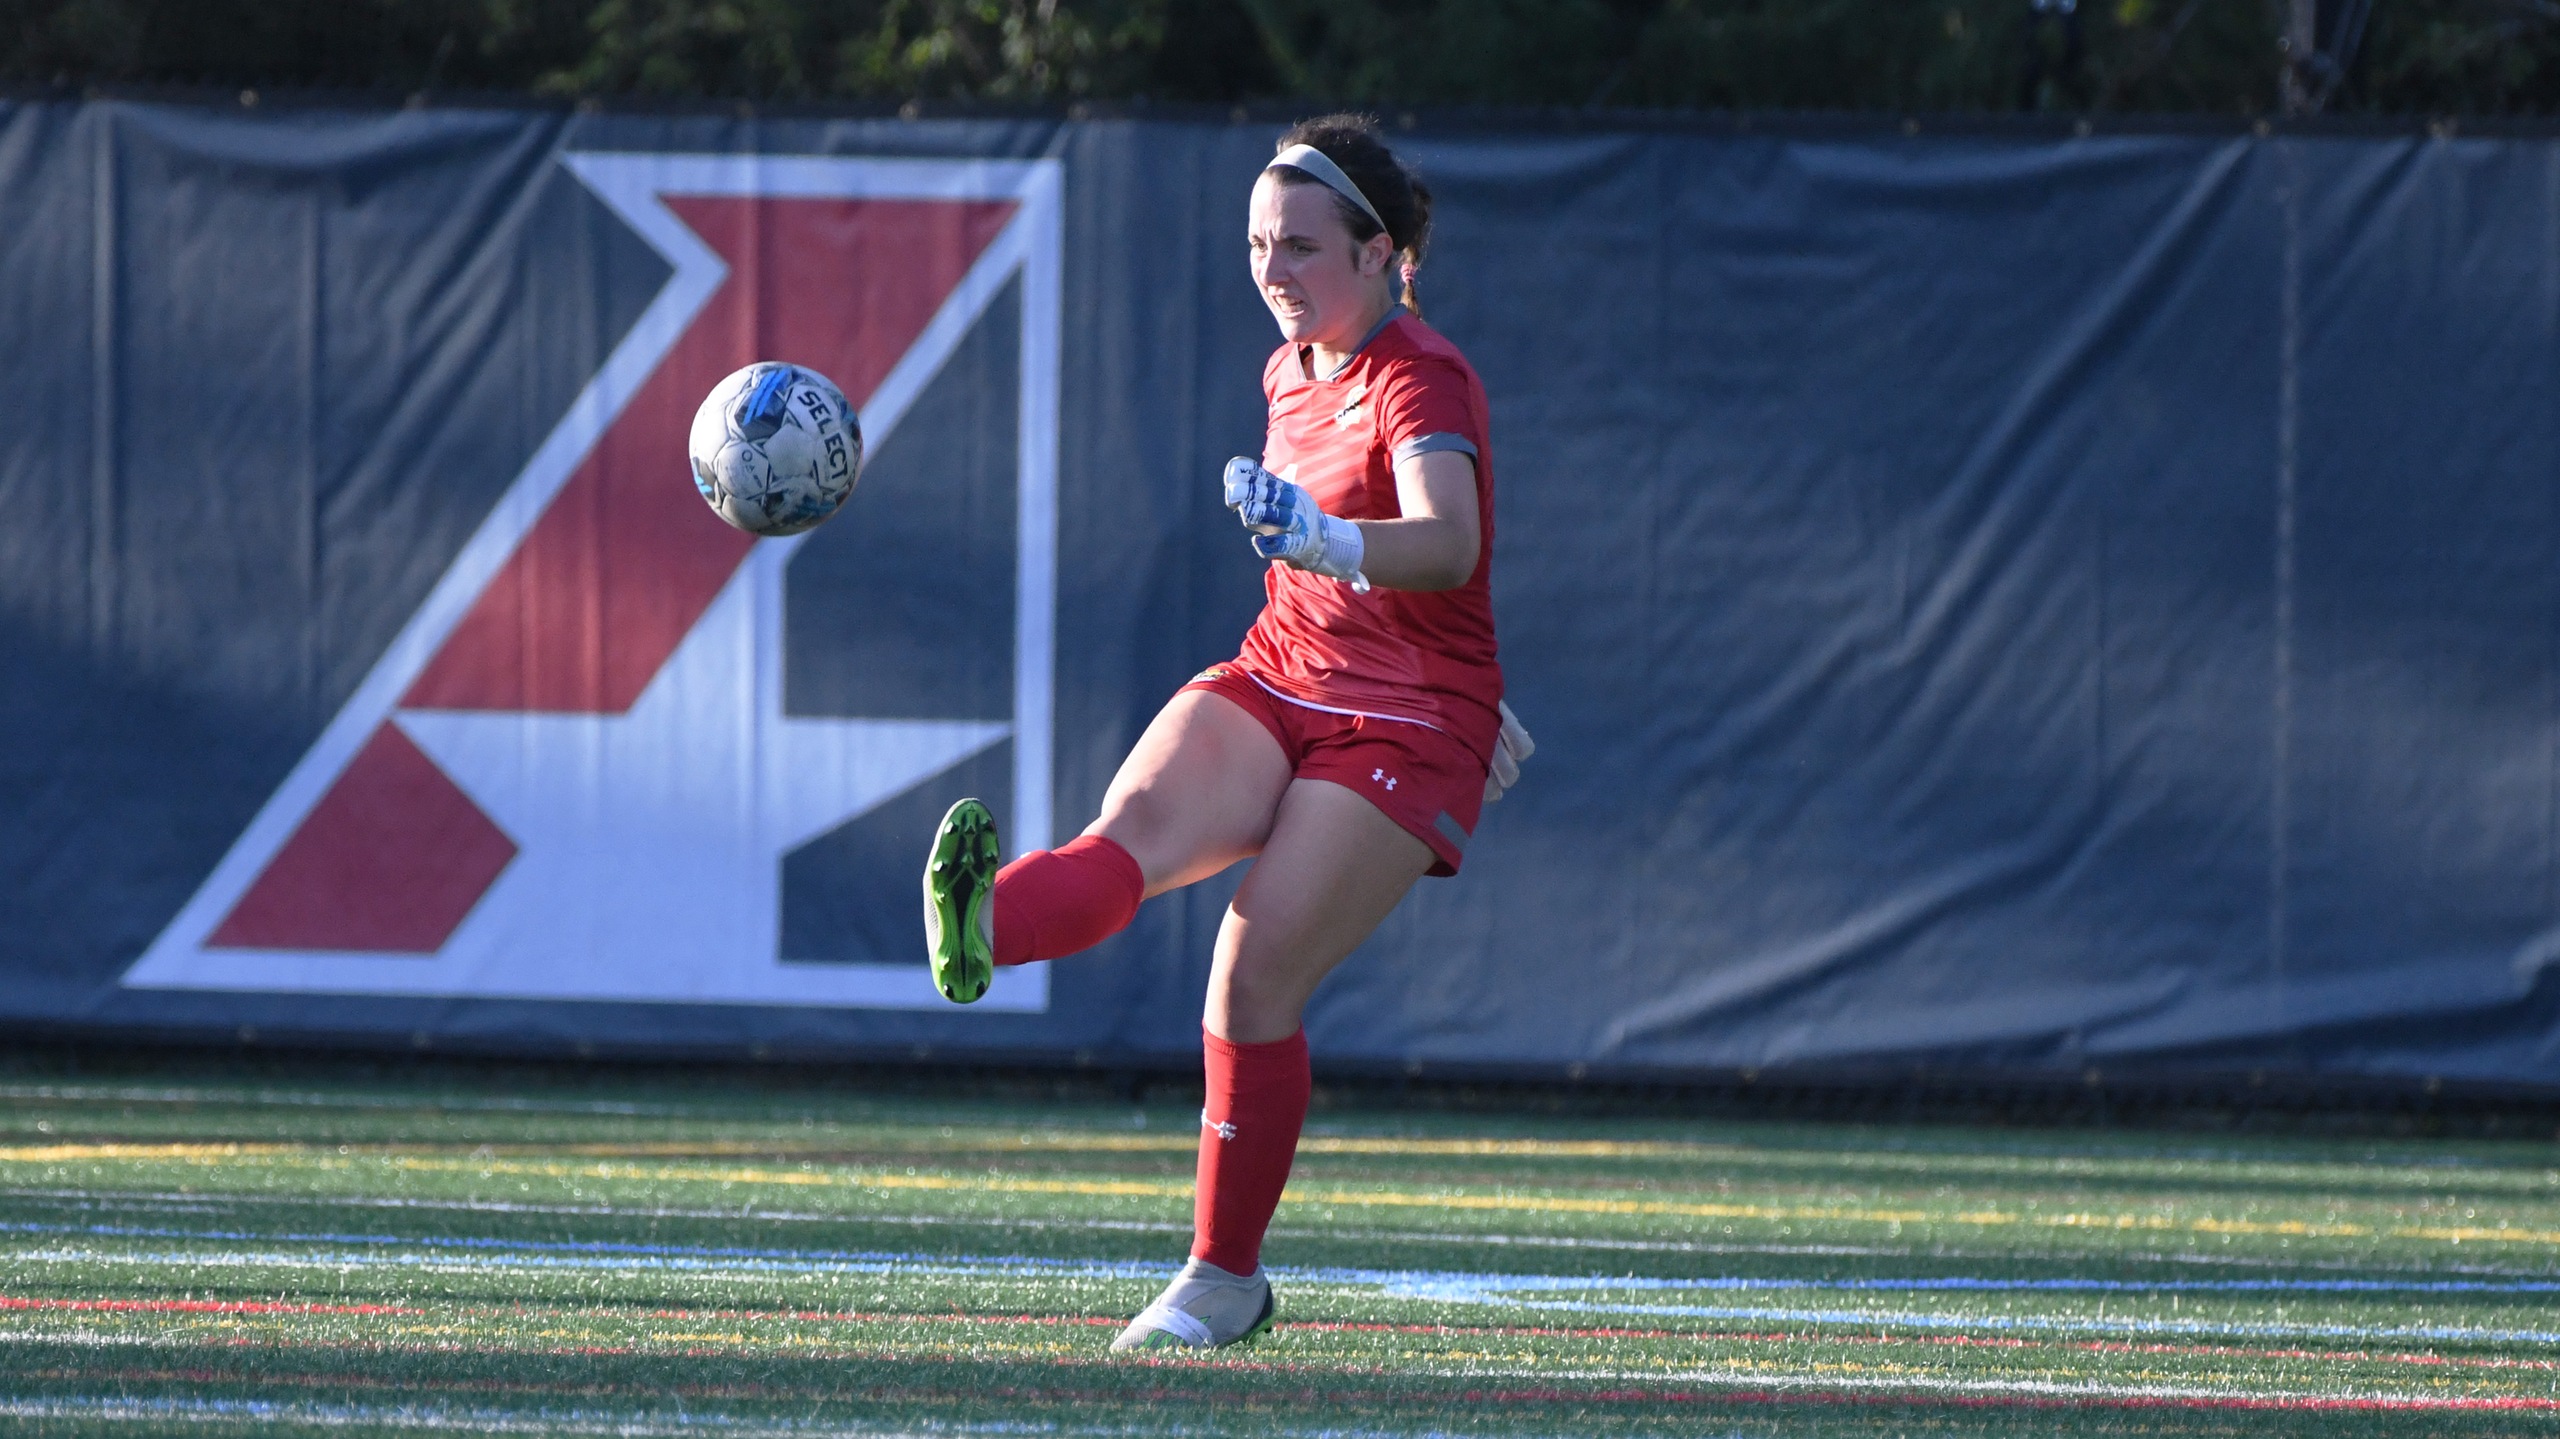 Lashomb earns second shutout of the season as Pride win 1-0 over Briar Cliff